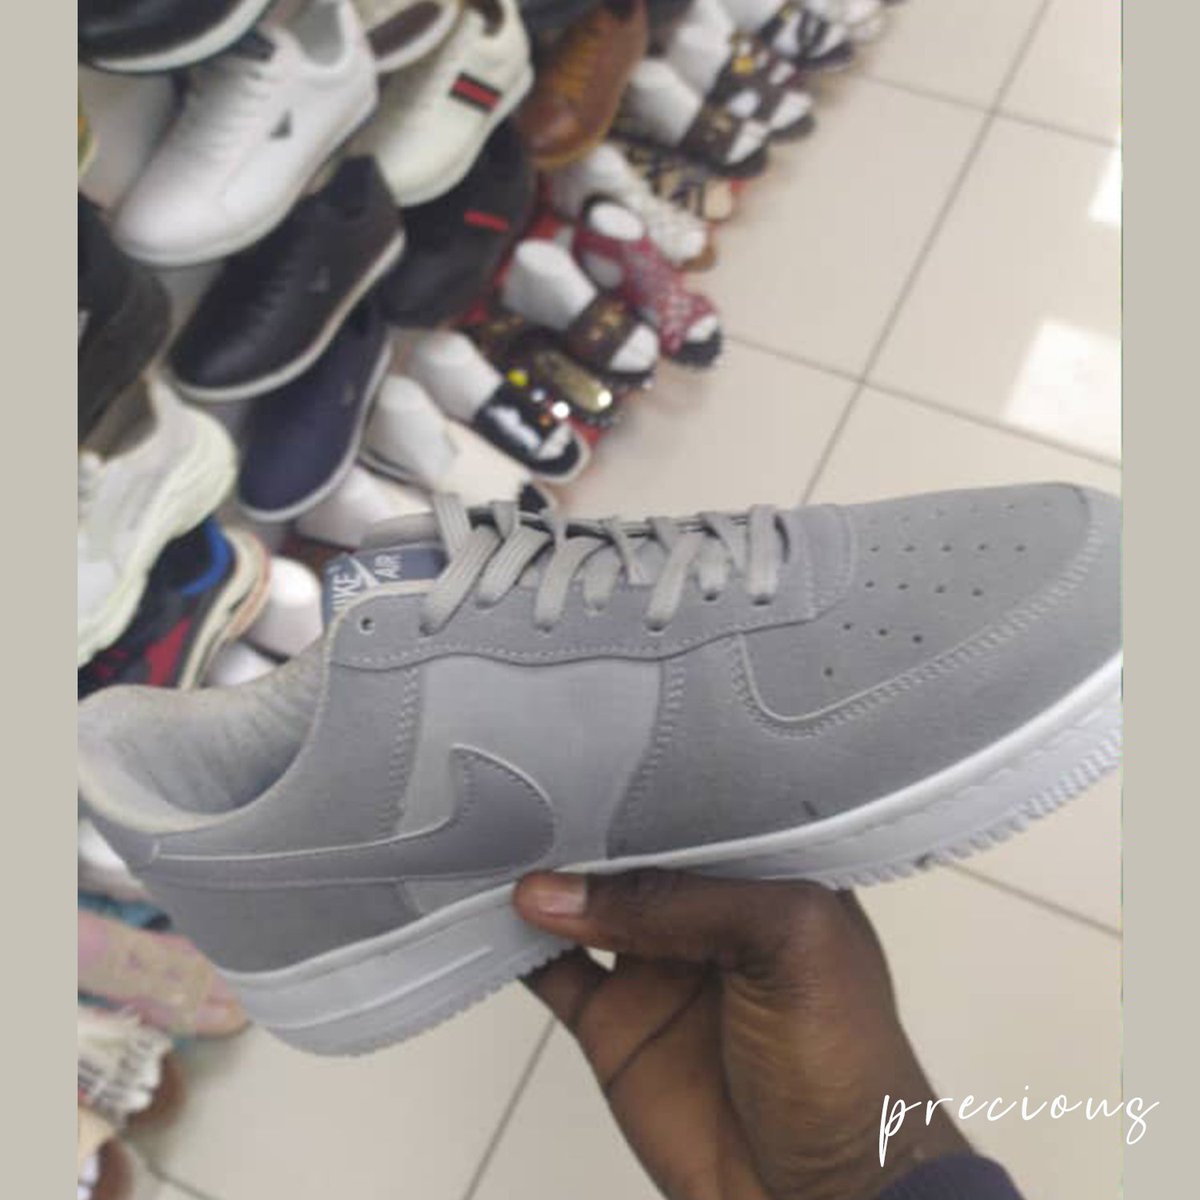 @tolaaaaaaaaaa @felixgx46 @davido @IamMayorKun Please Retweet and kindly Patronize me

Nike Sneakers (ash colour)

Price : 15k

No payment before delivery 

Different sizes are available